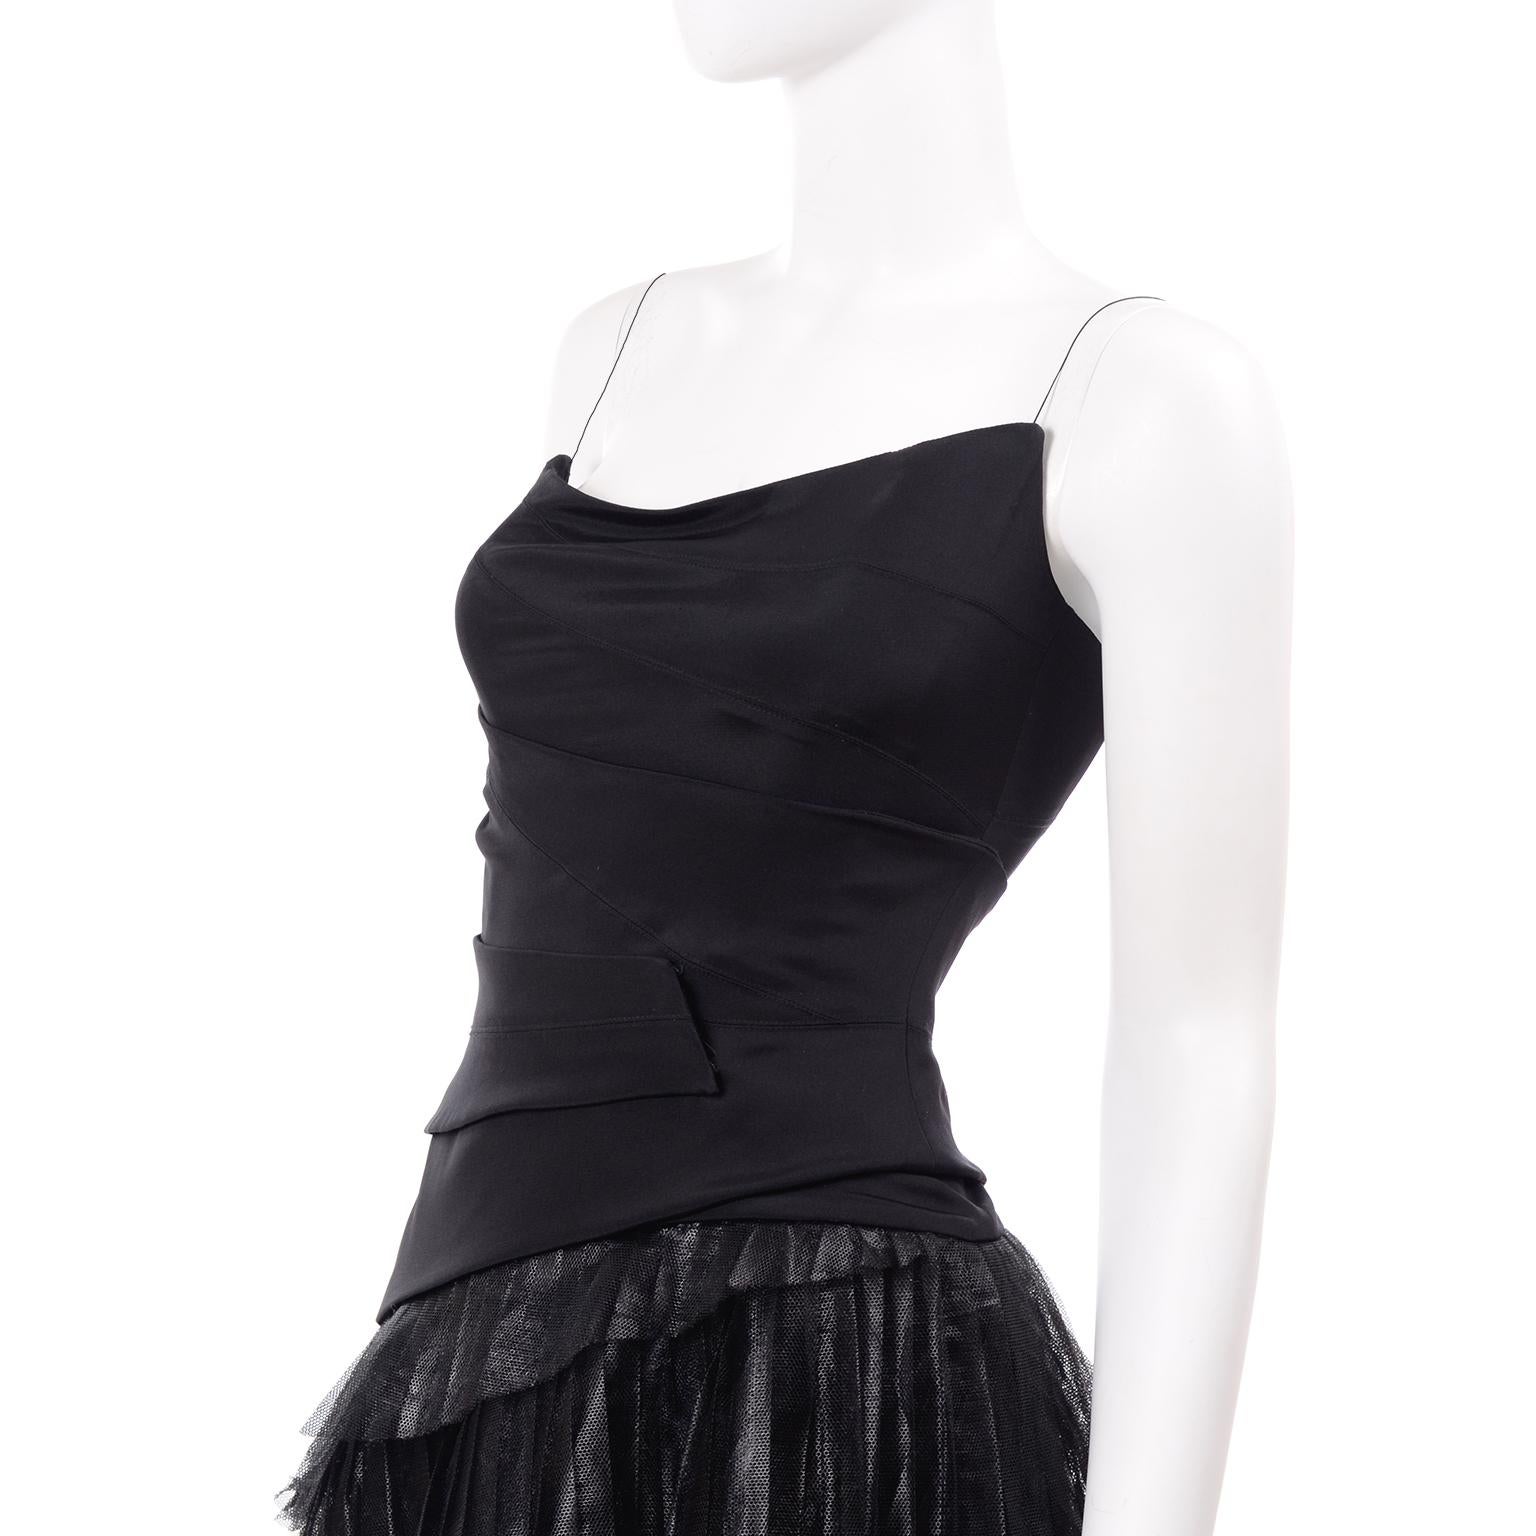 Danes Vintage Black Evening Dress With Asymmetrical Pleated Metallic Tulle Skirt For Sale 1